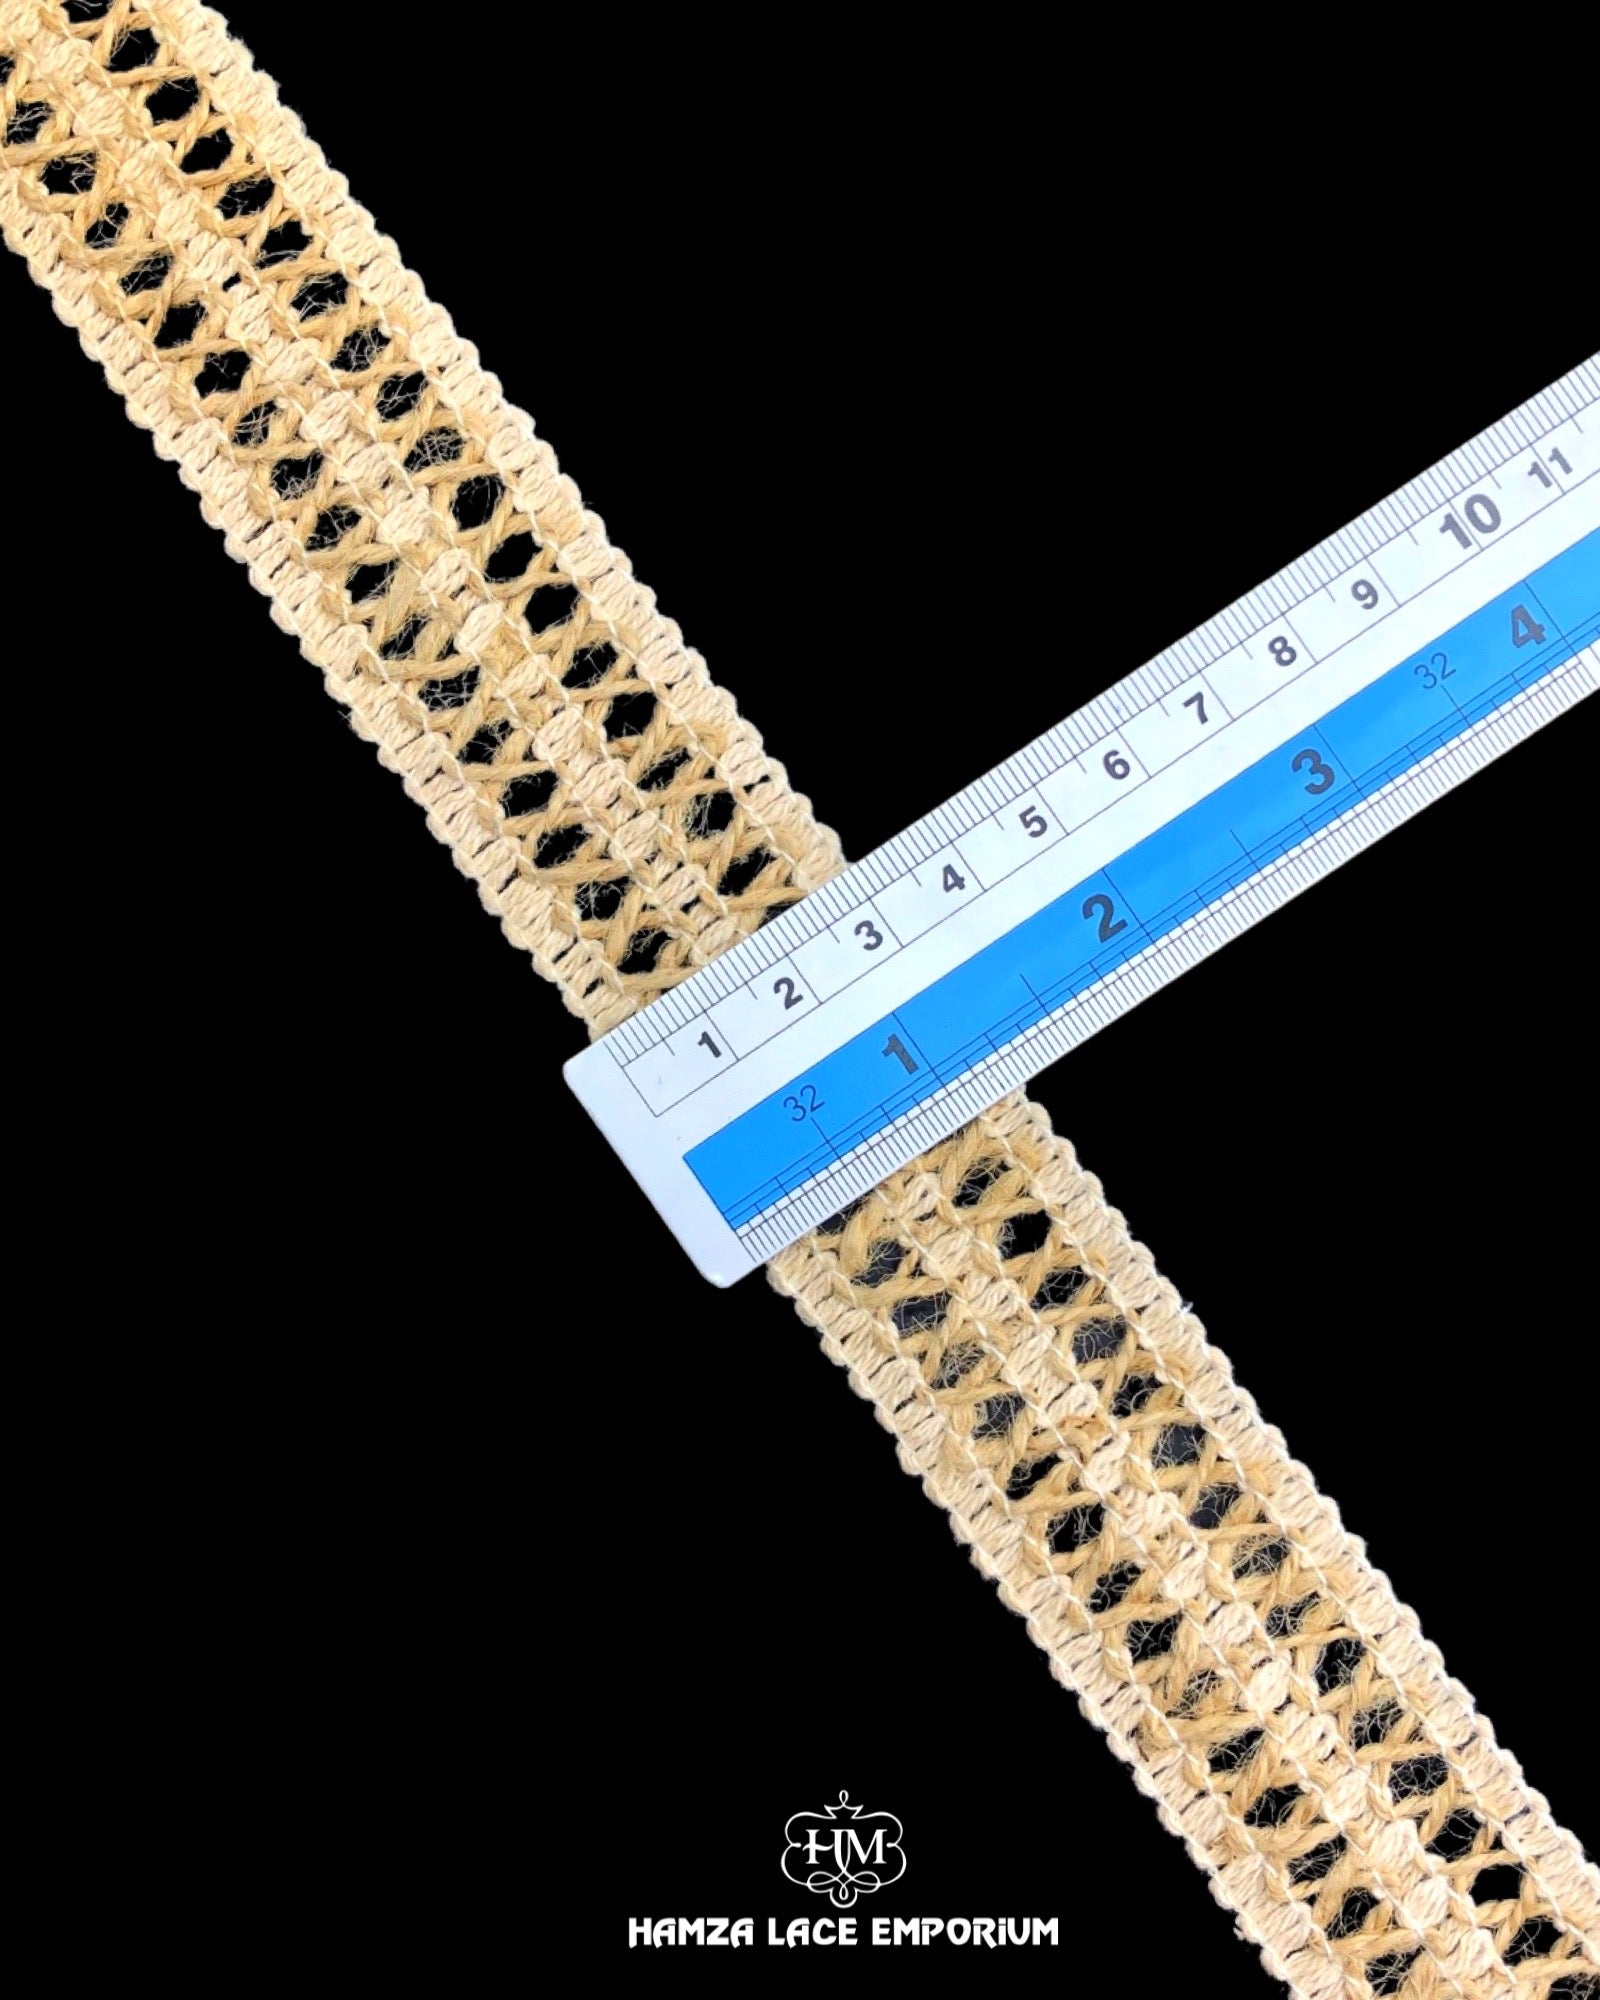 Size of the 'Jute Lace 21135' is displayed with the help of a ruler 